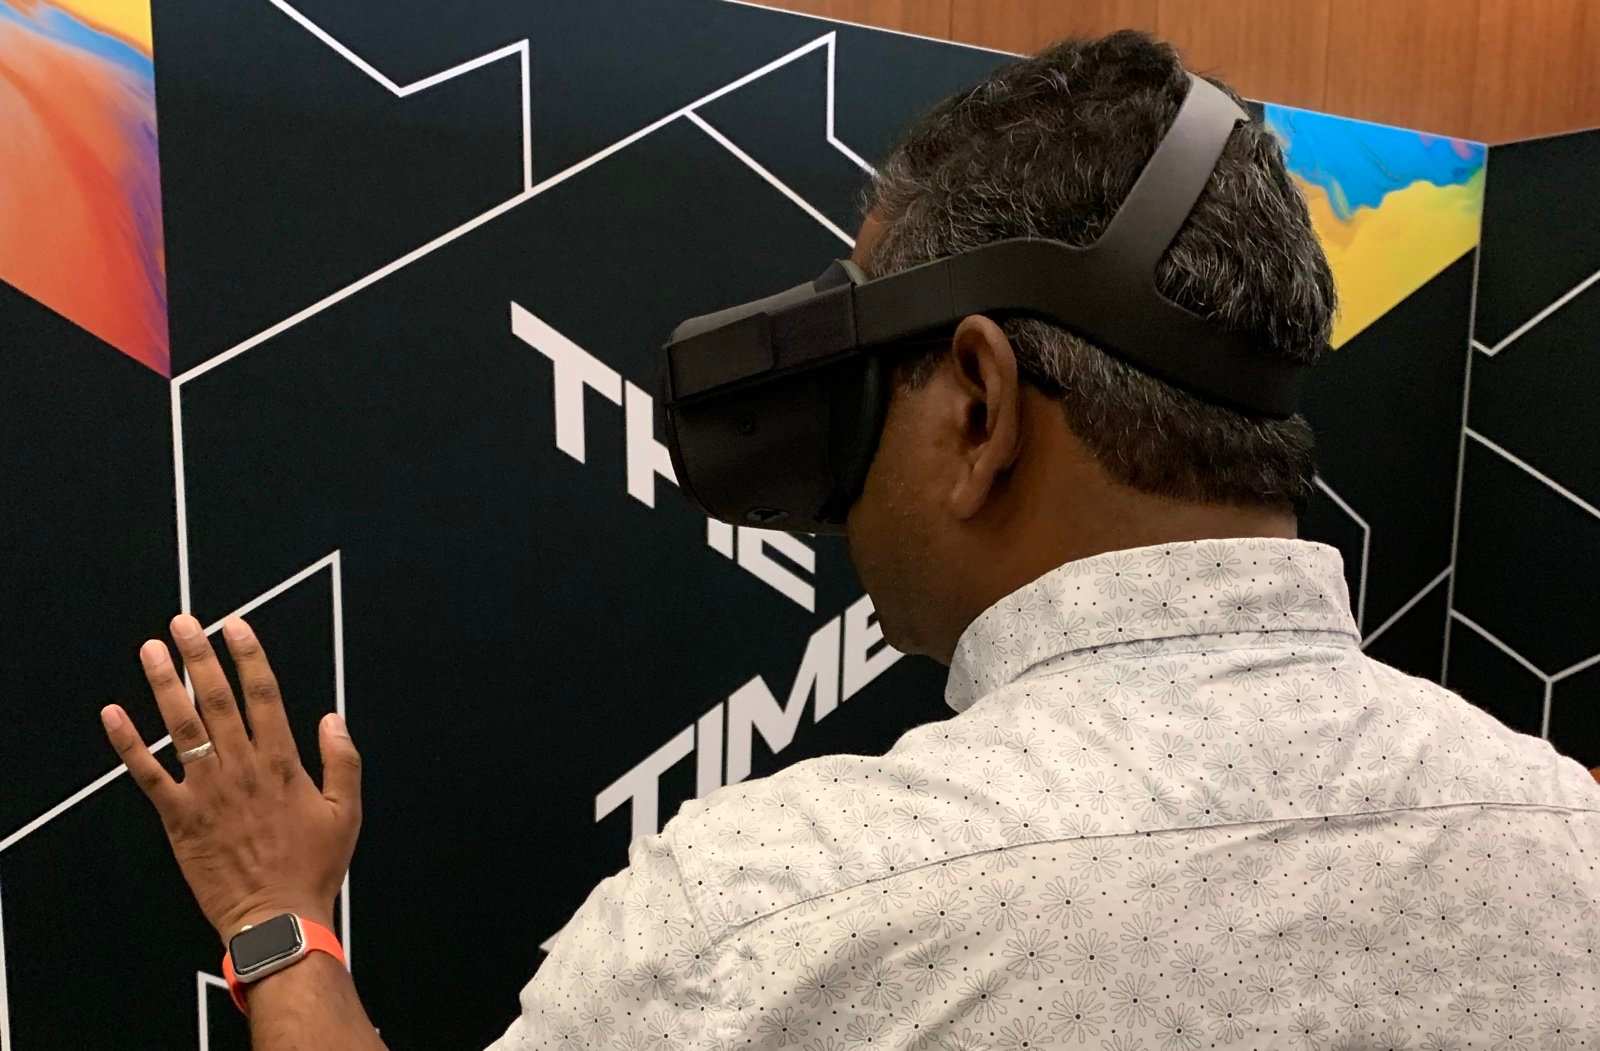 Oculus Quest’s hand tracking is a new level of VR immersion